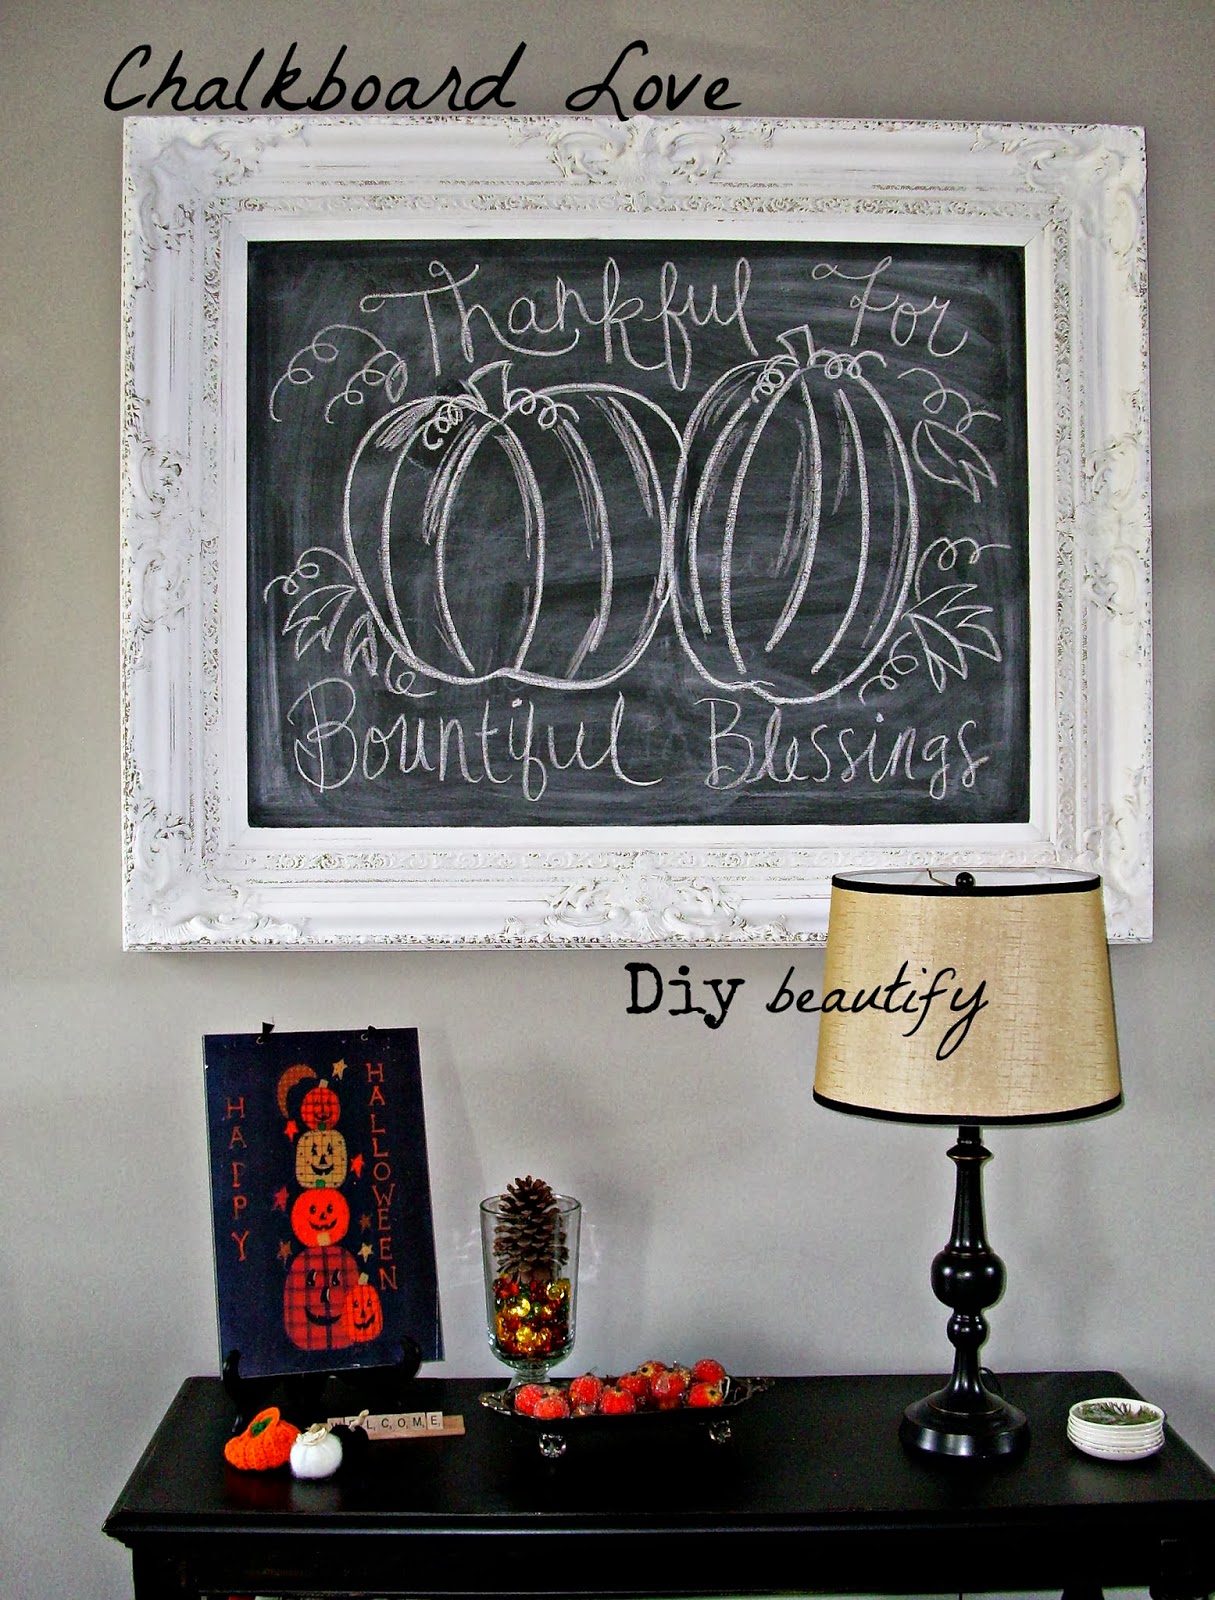 How to Make a Chalkboard From a Cupboard Door | DIY beautify